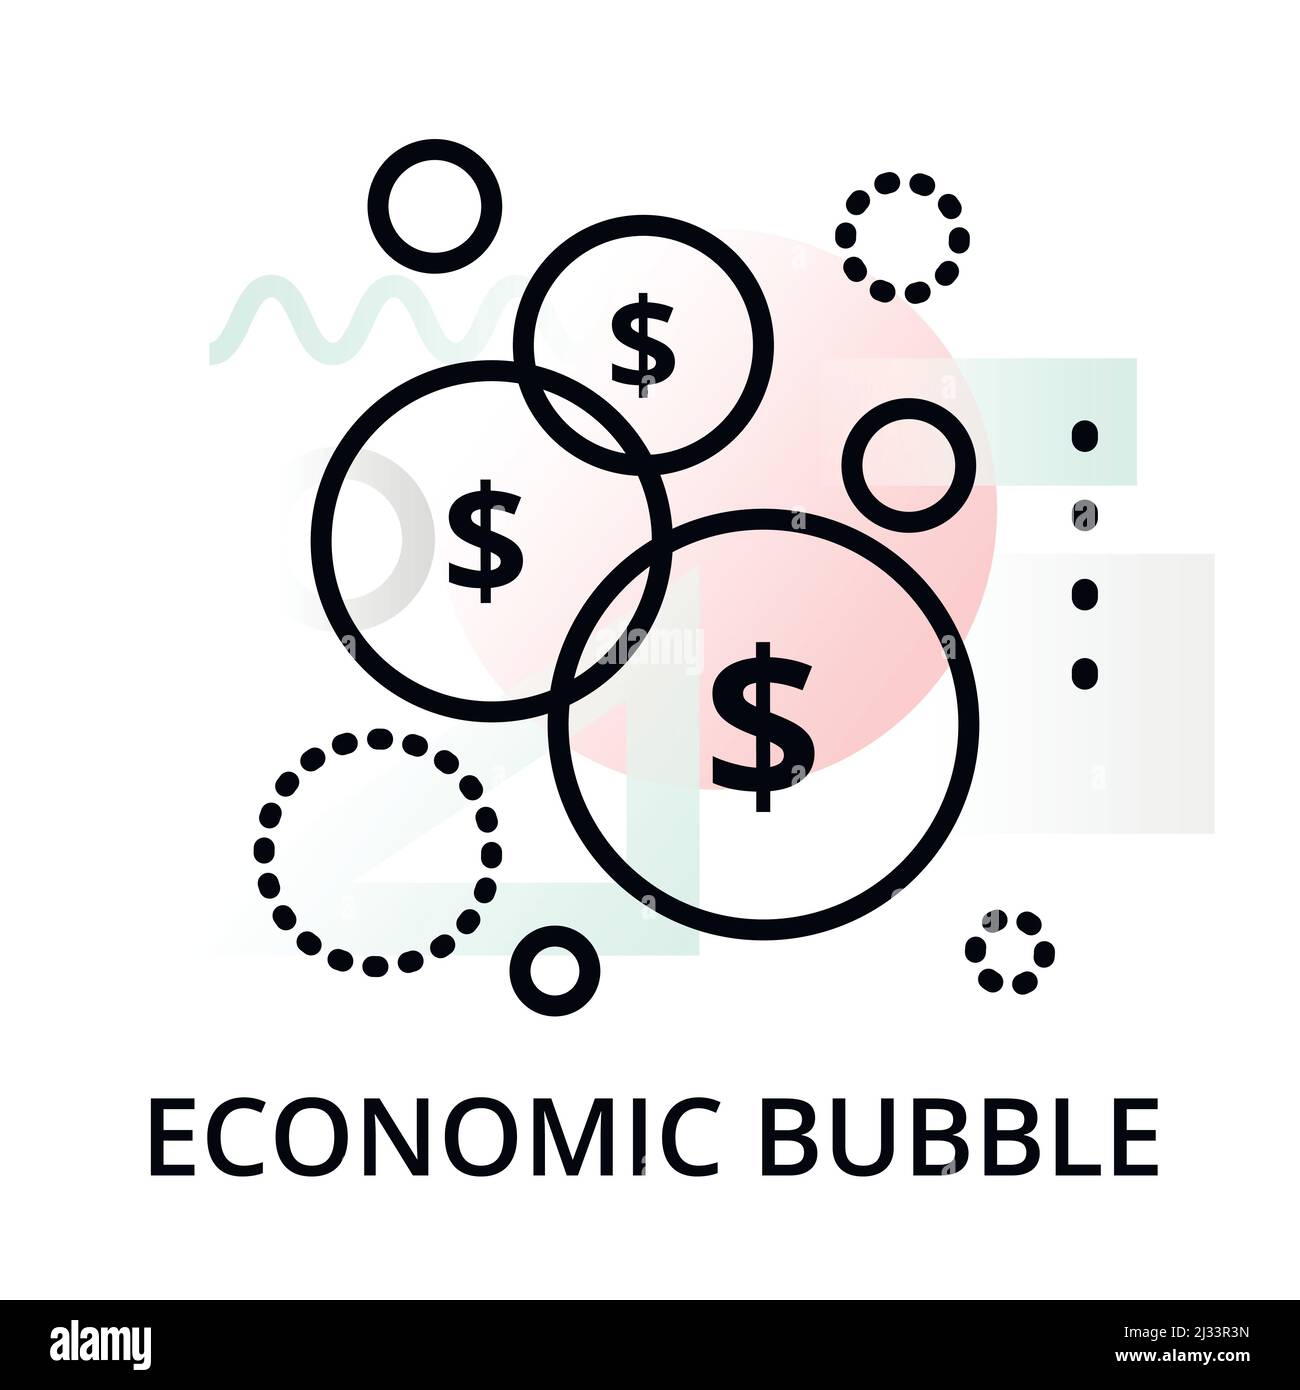 Economic bubble icon on abstract background from startup set, modern editable line vector illustration, for graphic and web design Stock Vector